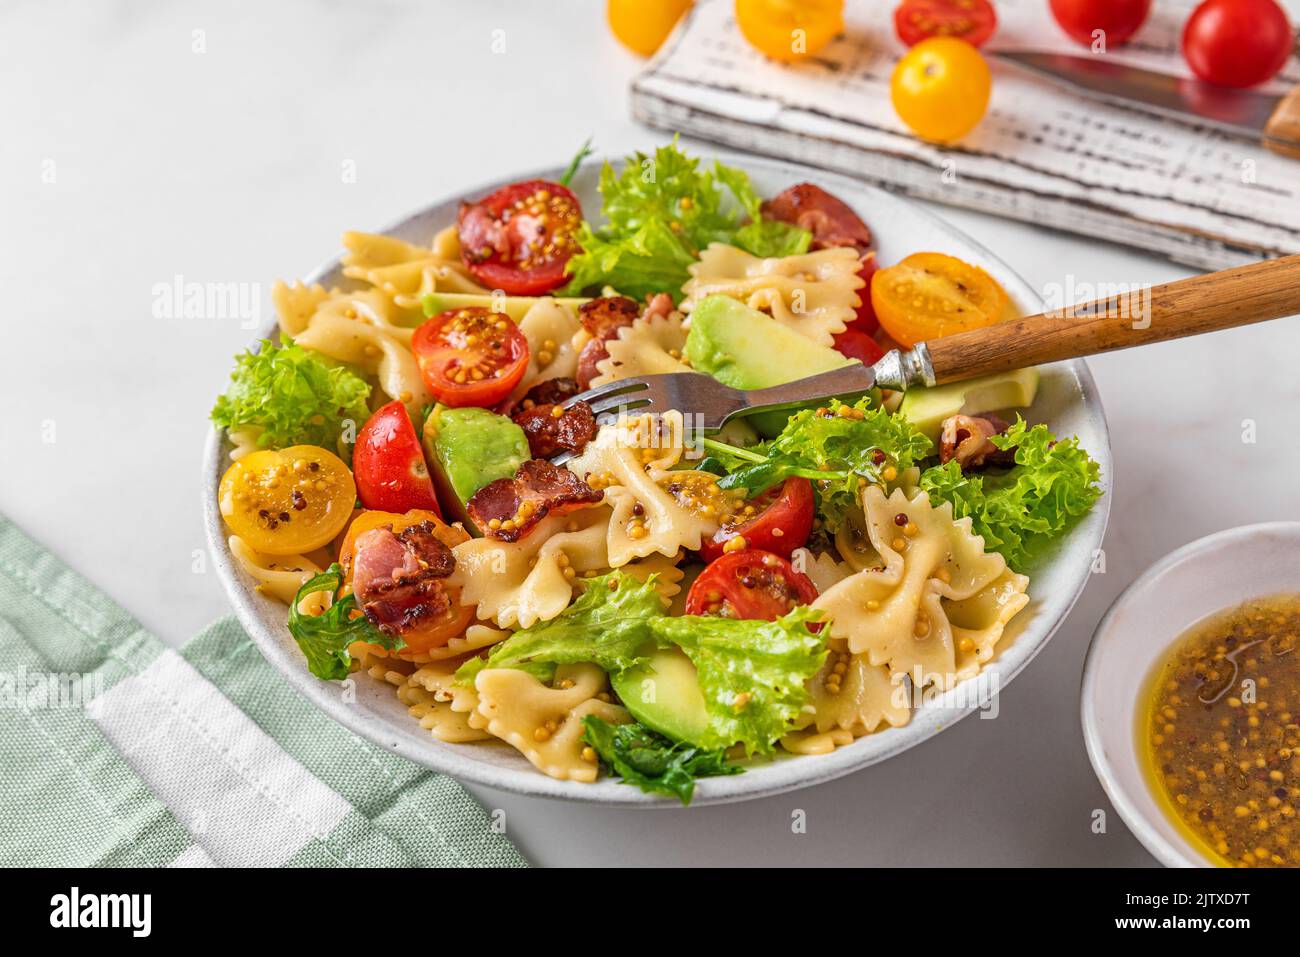 Cold summer pasta salad with bacon, tomatoes, avocado and mustard in a plate with fork on white background. Healthy diet food Stock Photo